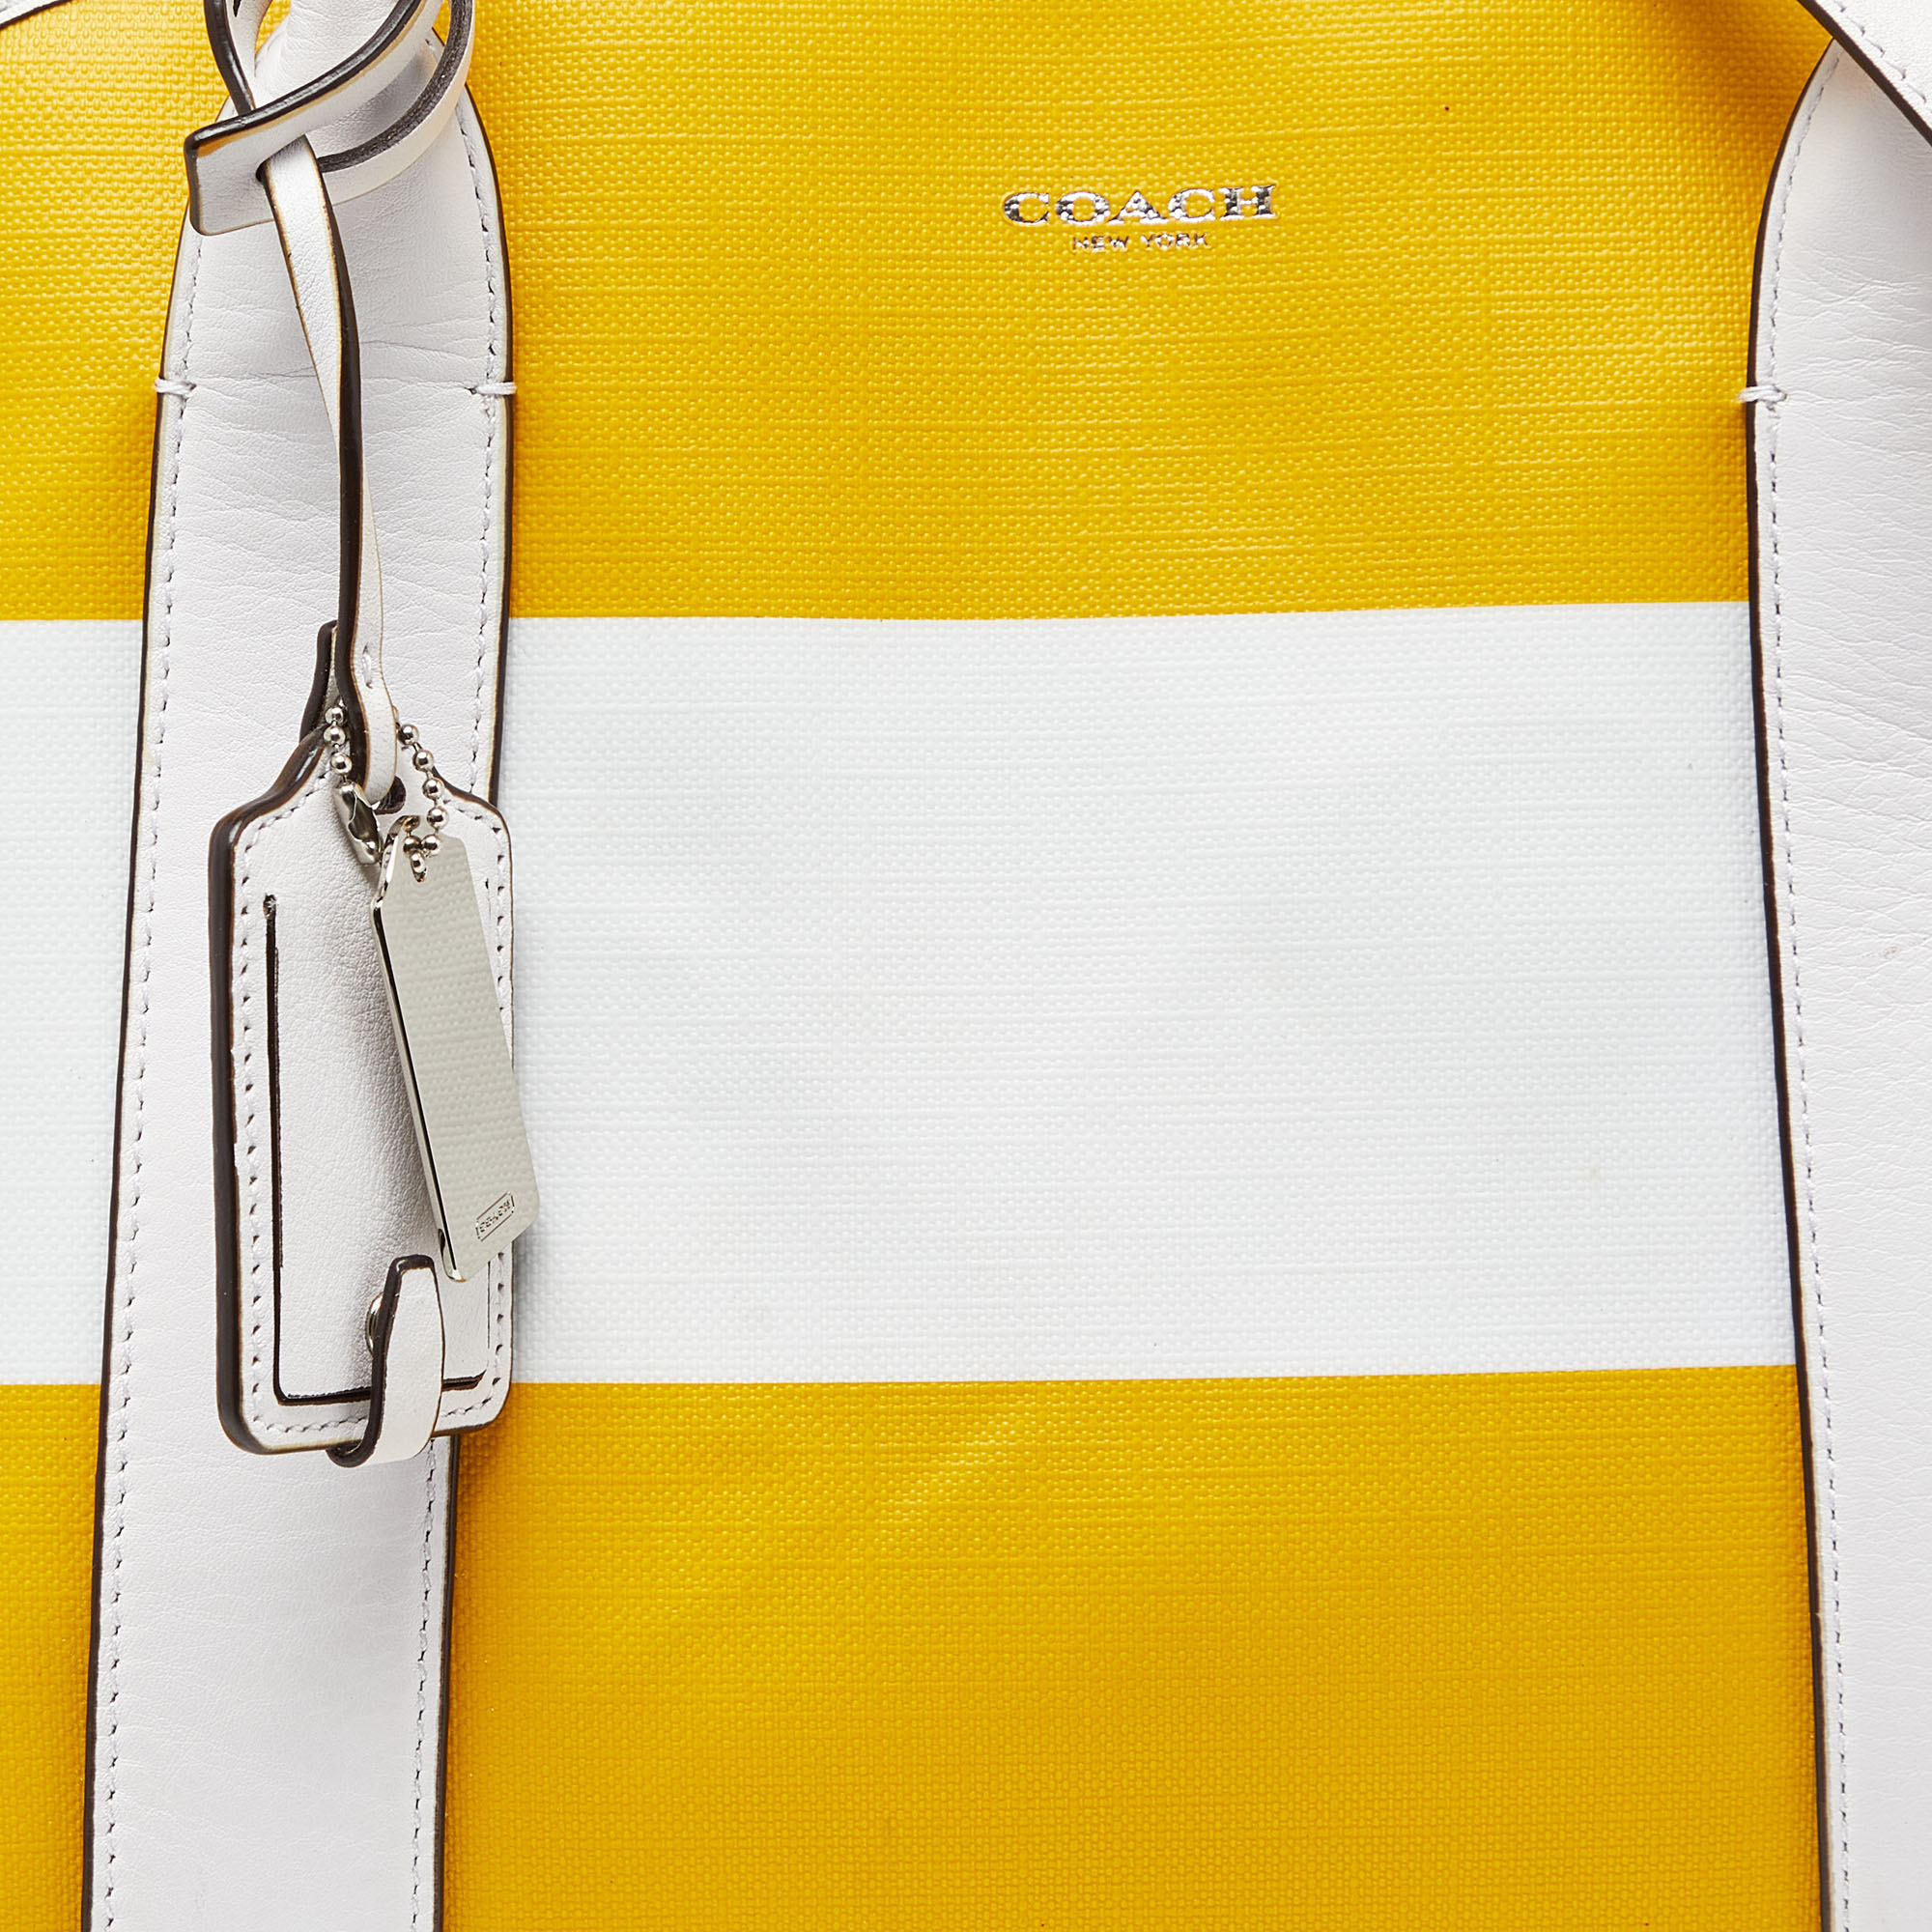 Coach Yellow/White Striped Coated Canvas And Leather Satchel